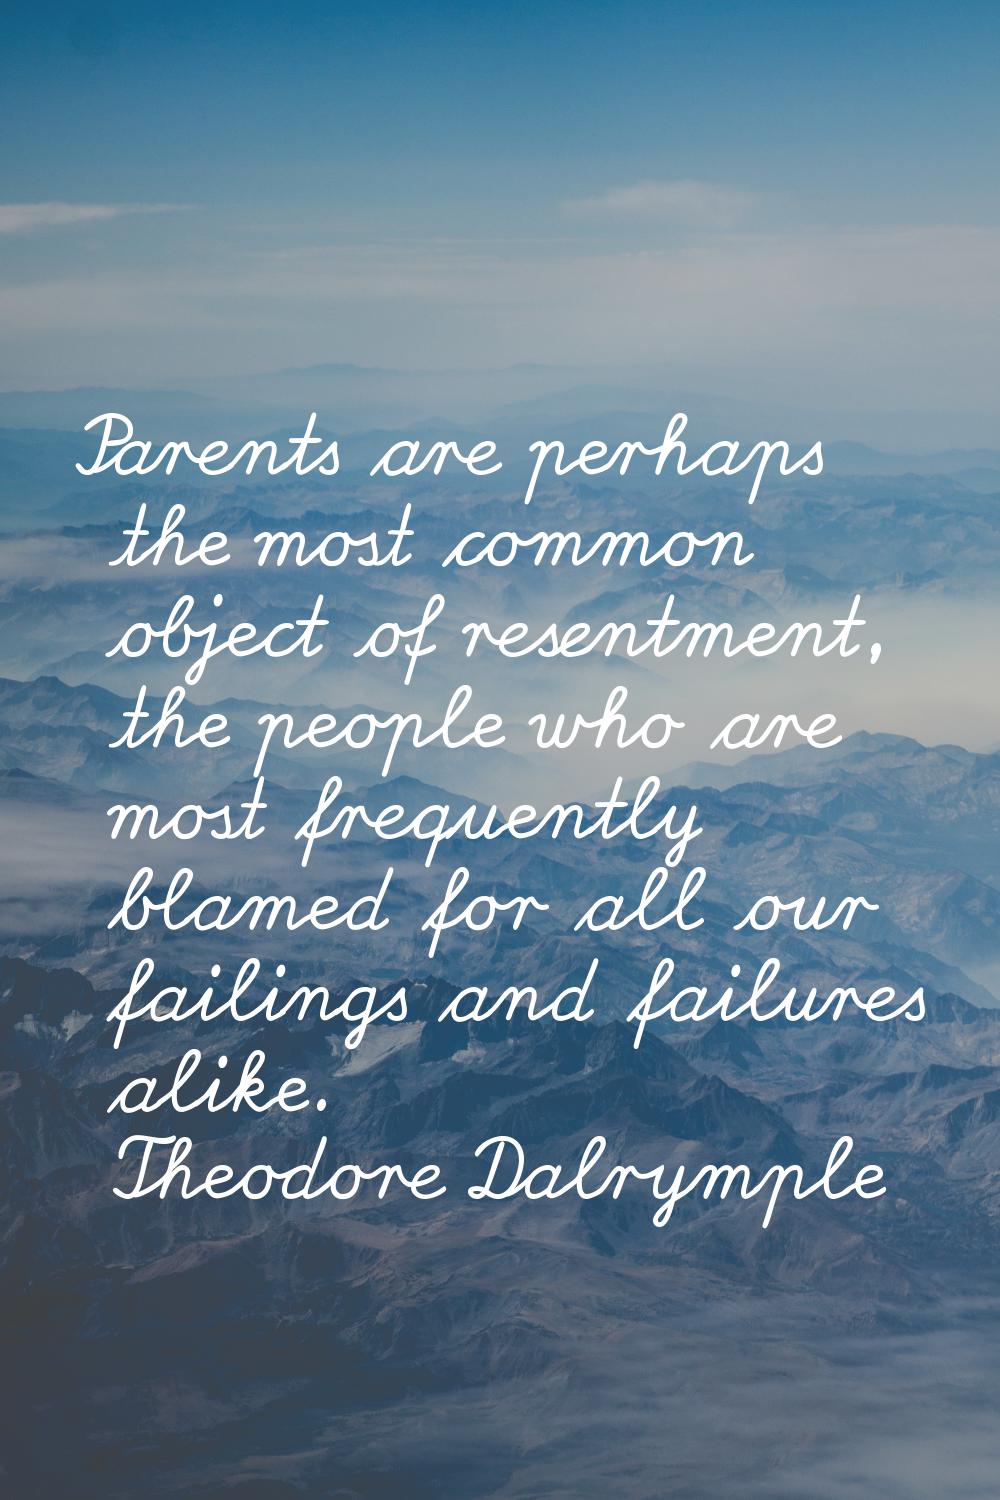 Parents are perhaps the most common object of resentment, the people who are most frequently blamed